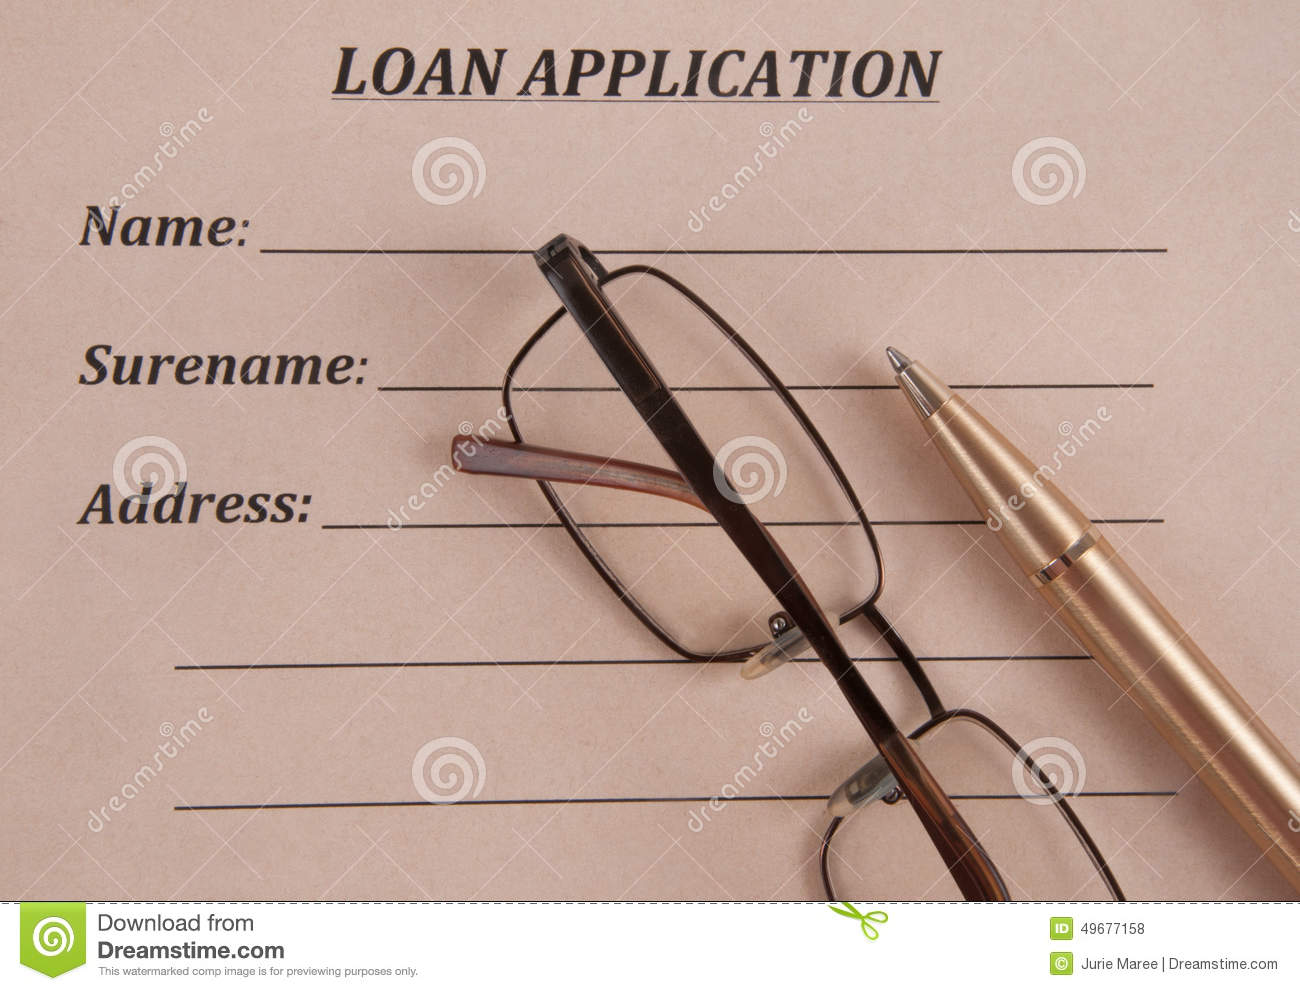 Loan Application Document Photographed In A Studio